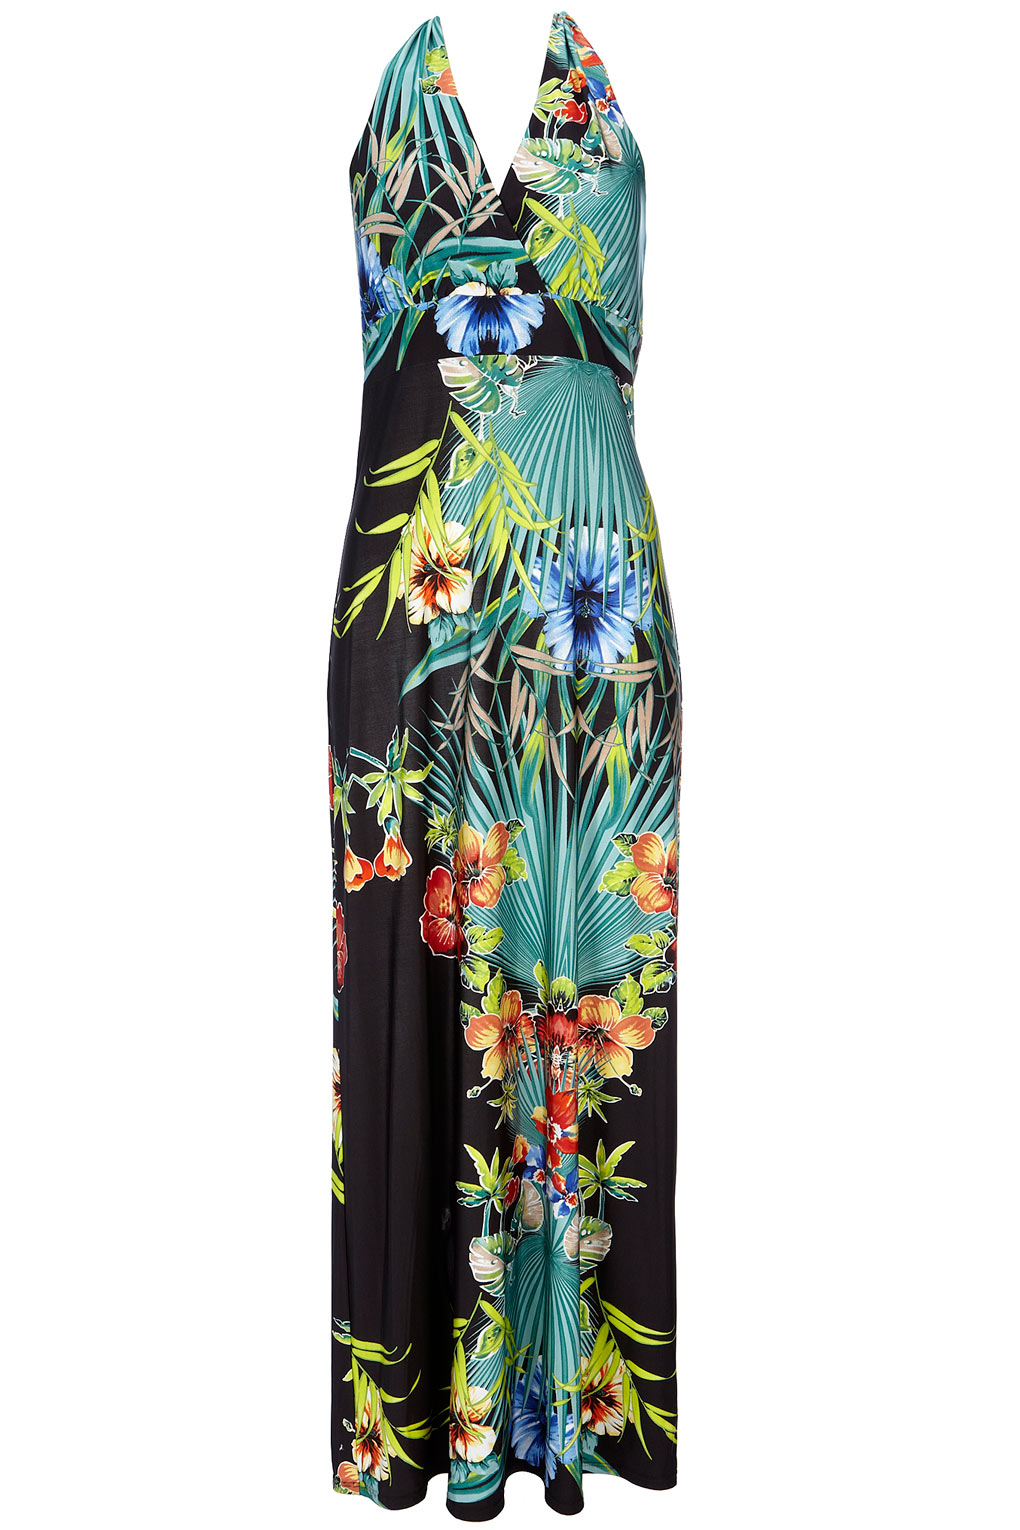 SHOP FOR THE BRYONY MAXI DRESS IN THE PHASE EIGHT SALE